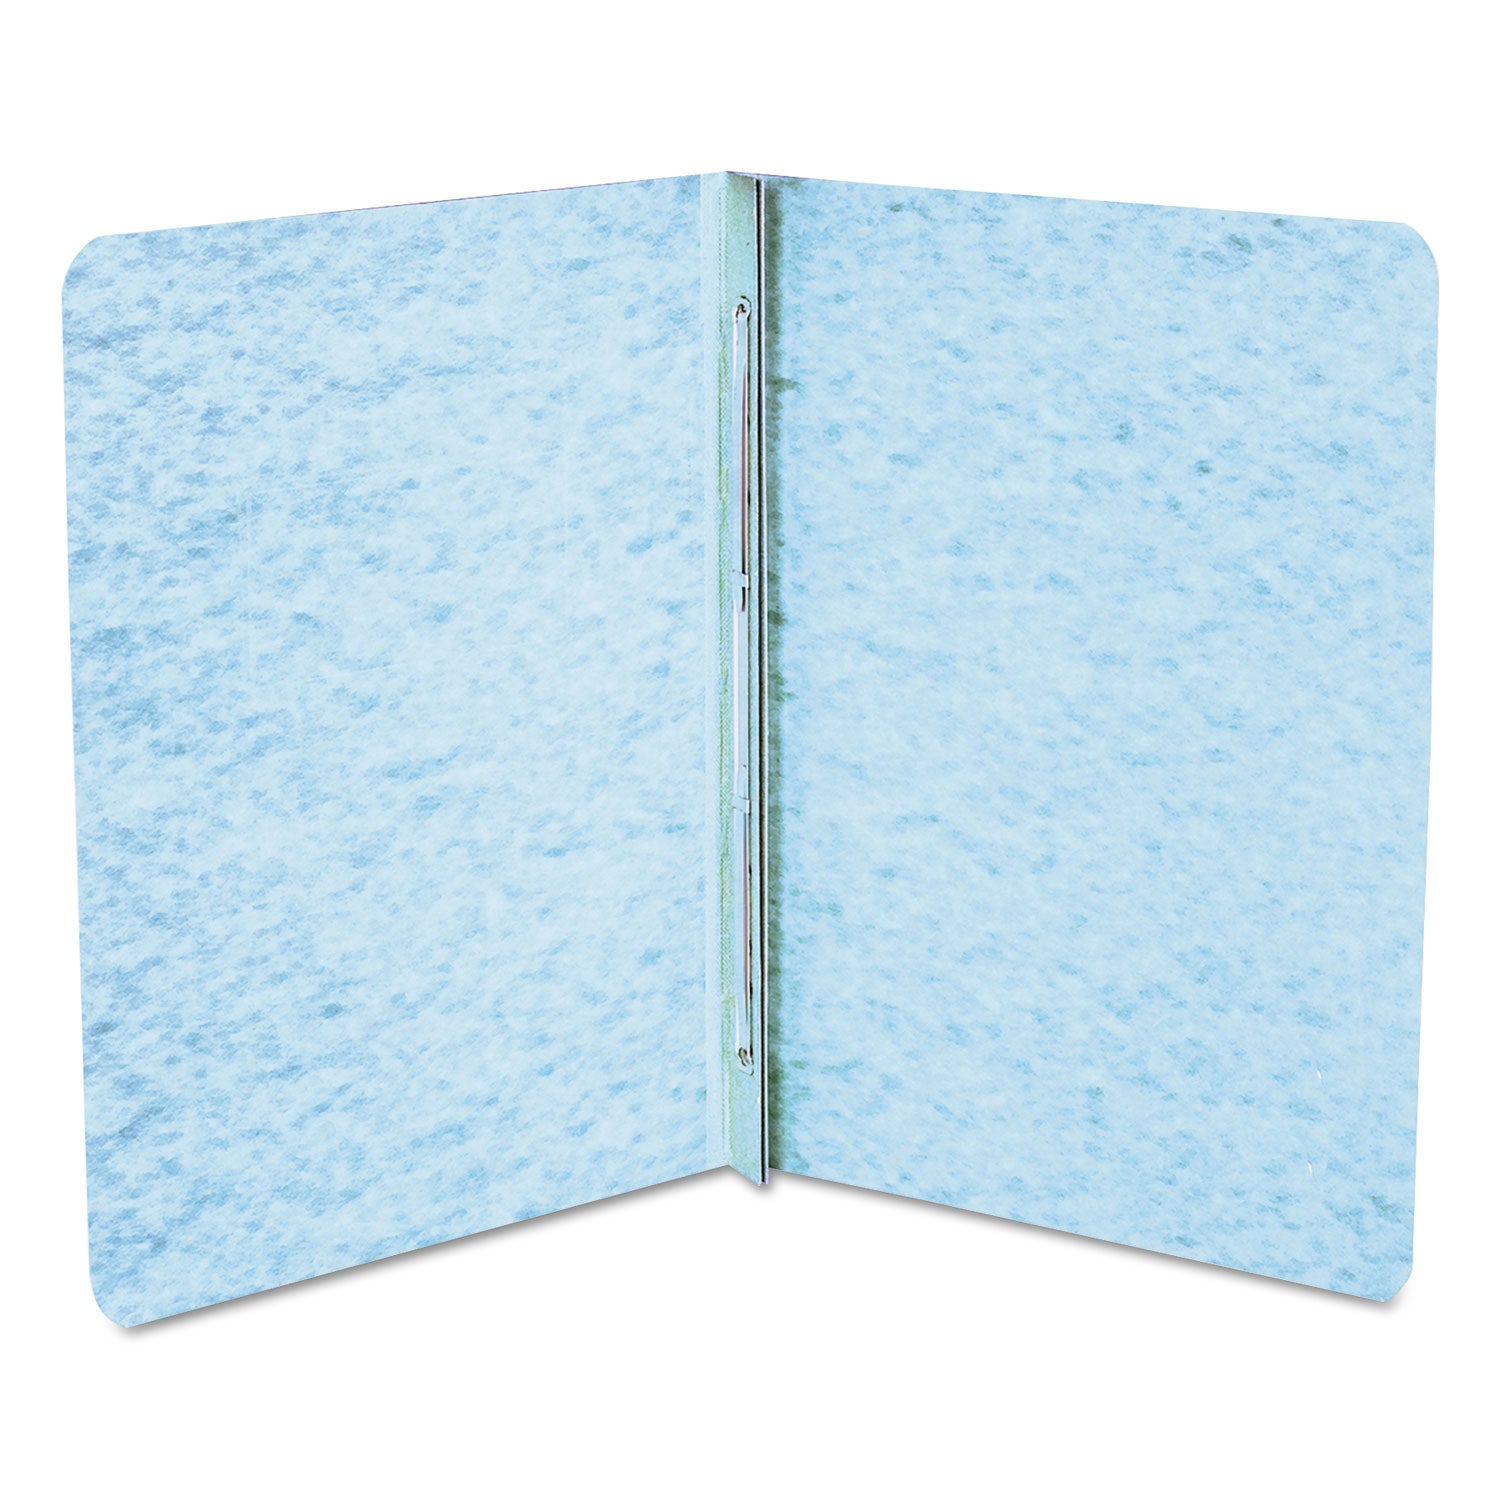 PRESSTEX Report Cover with Tyvek Reinforced Hinge, Side Bound, Two-Piece Prong Fastener, 3" Capacity, 8.5 x 11, Light Blue - 